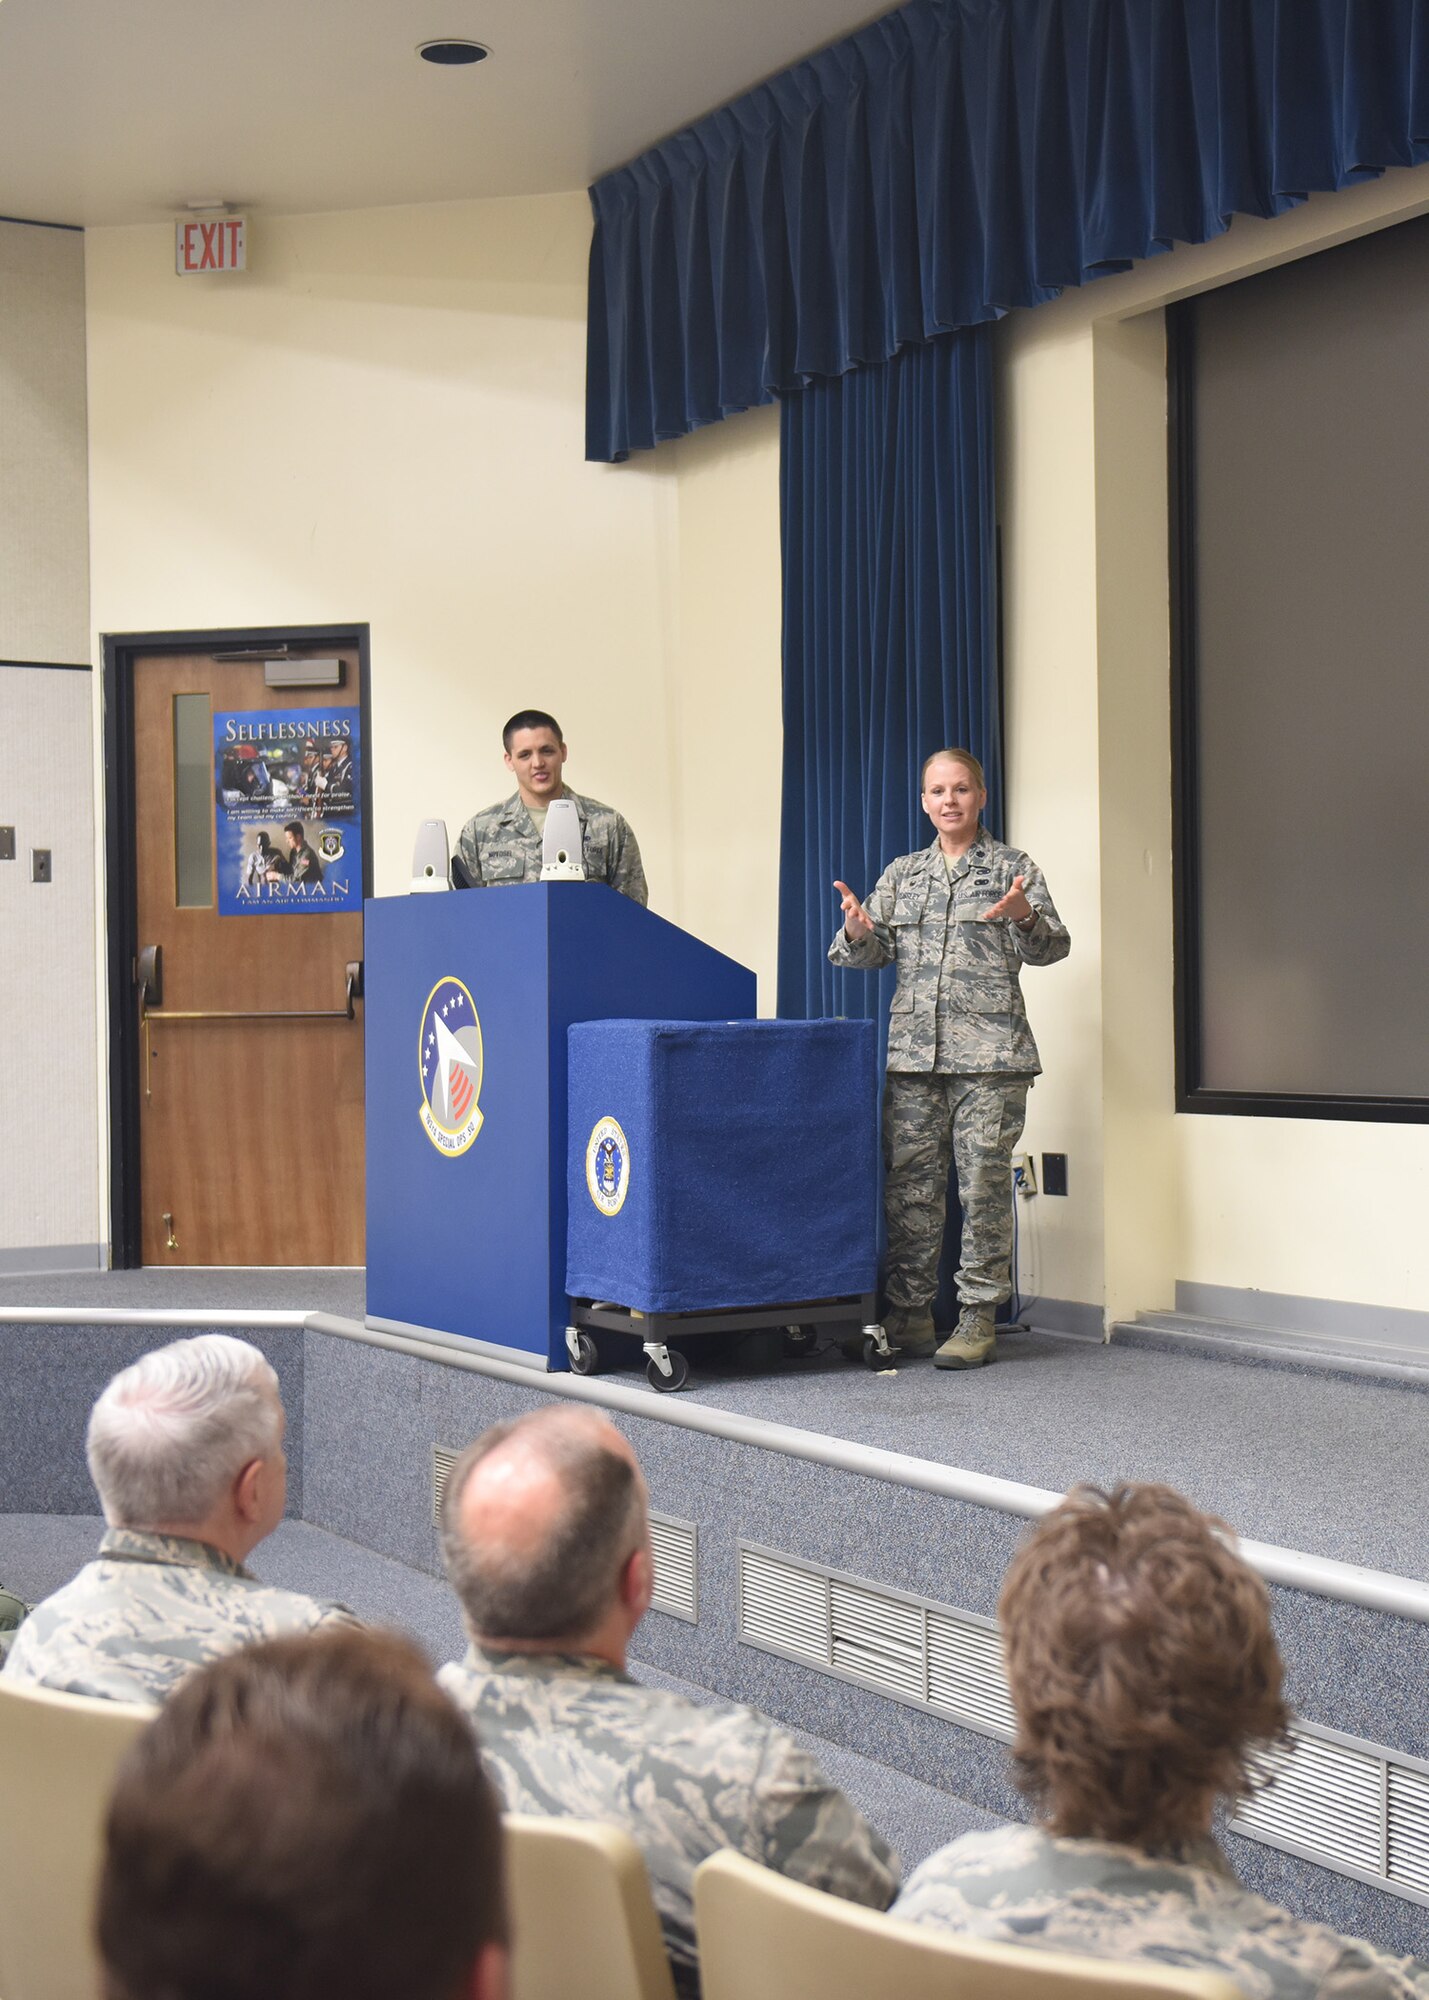 Lt. Col. Amy Crossley, 193rd Special Operations Maintenance Squadron commander, addresses the audience at her change-of-command ceremony June 11 at the 193rd Special Operations Wing, Middletown, Pennsylvania. Crossley is the first female maintenance squadron commander at the 193rd SOW. (U.S. Air National Guard photo by Airman 1st Class Julia Sorber/Released)